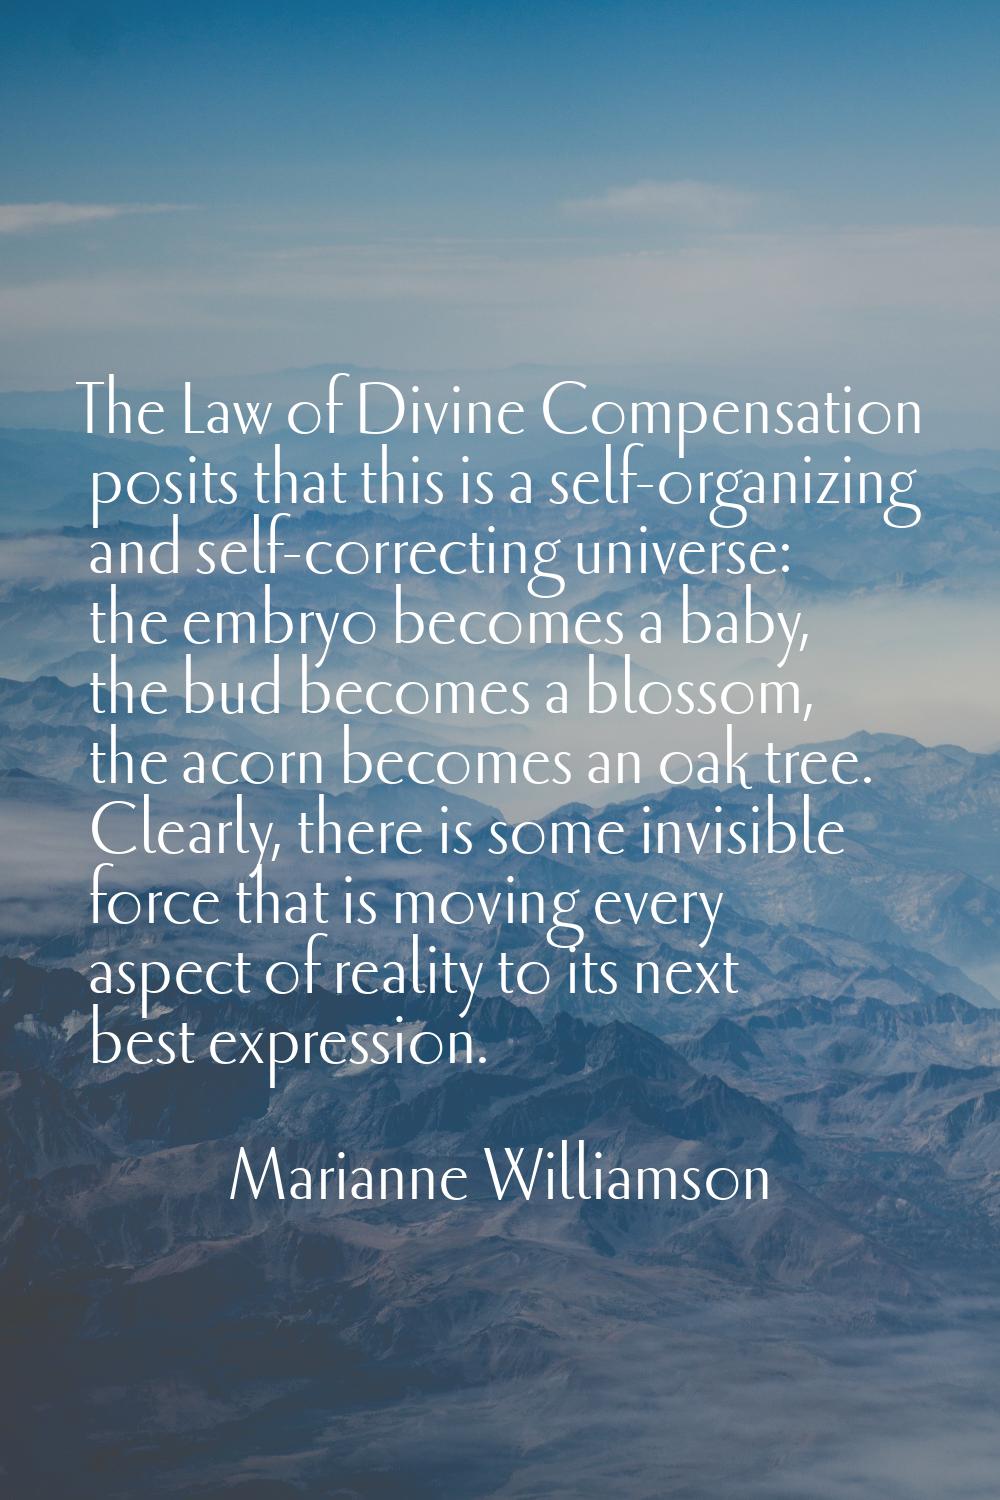 The Law of Divine Compensation posits that this is a self-organizing and self-correcting universe: 